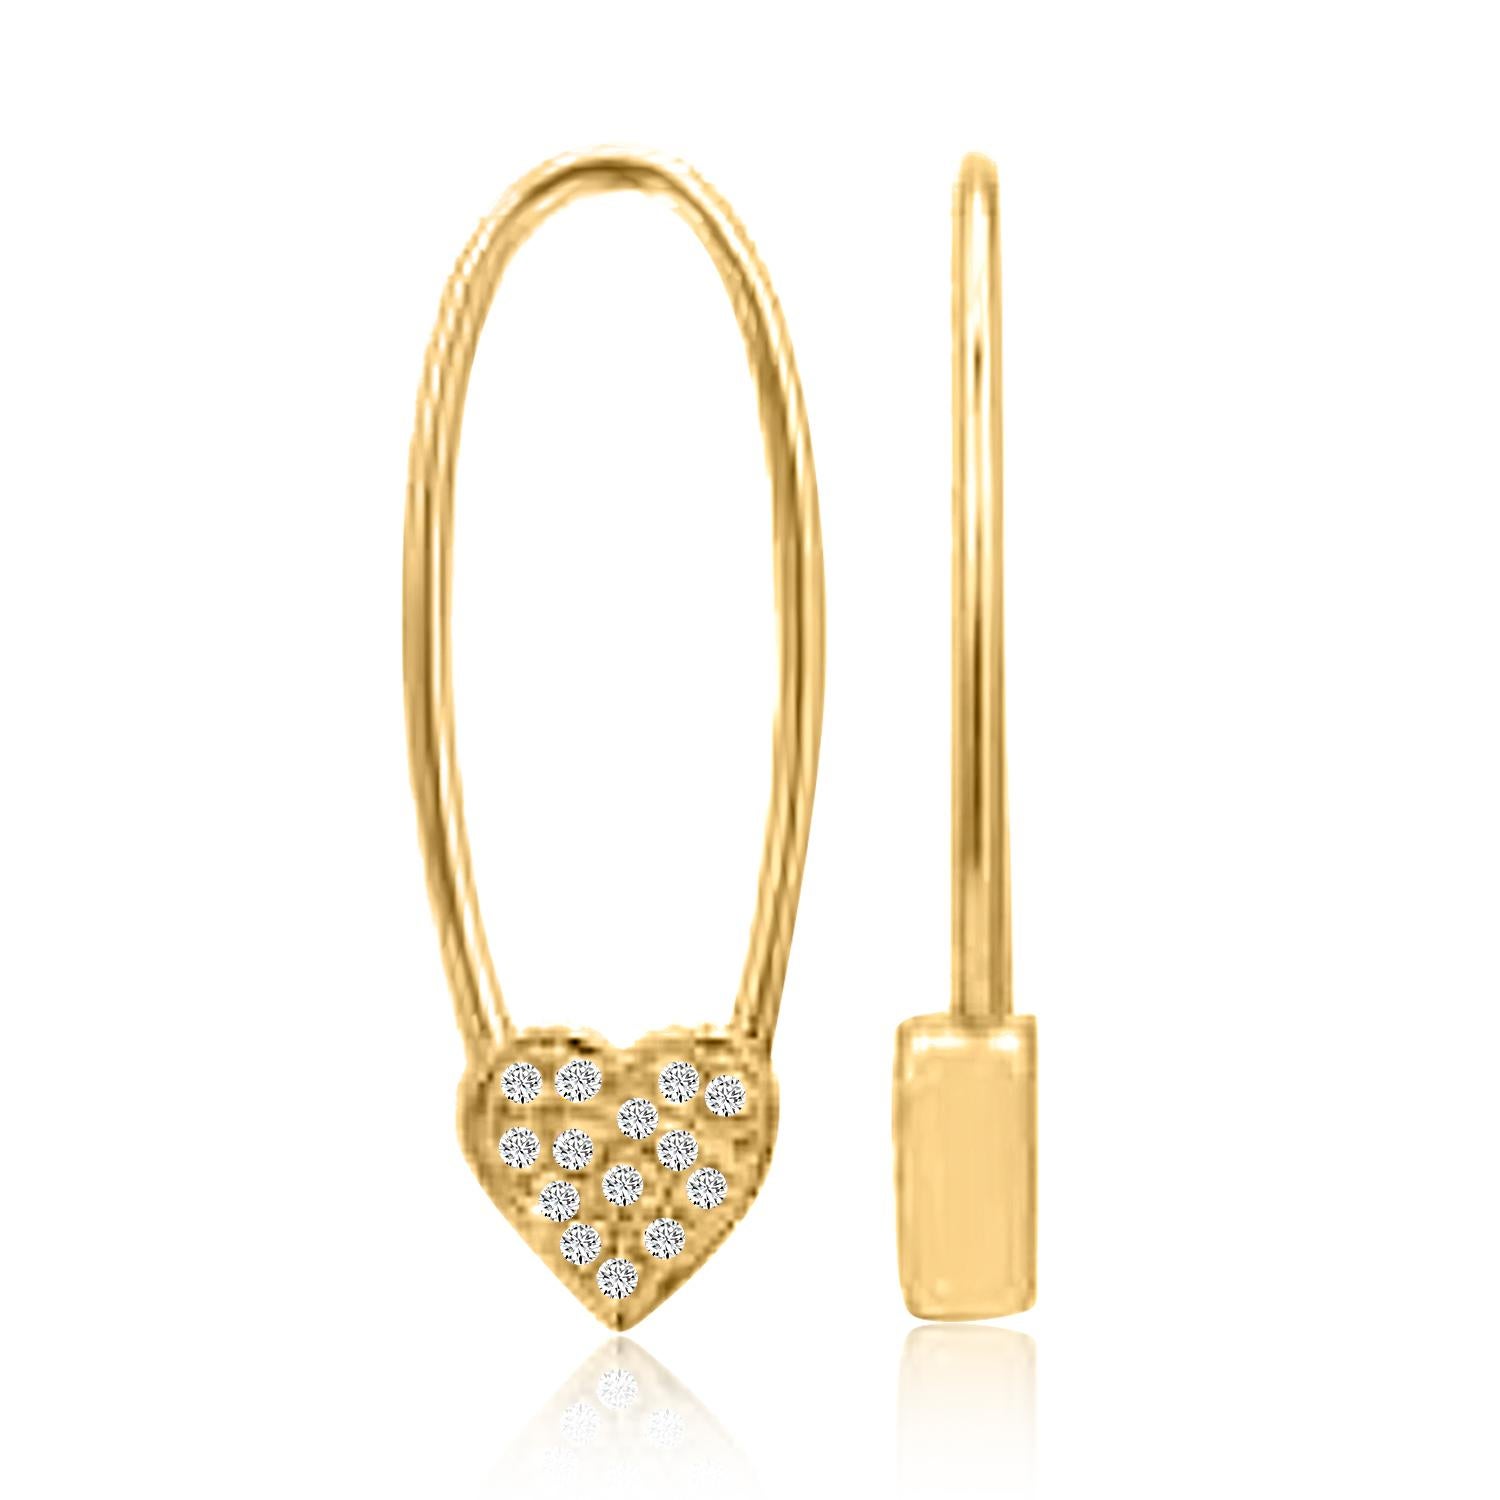 Heart Threader Drop Diamond Earrings

Earrings Information
Diamond Type : Natural Diamond
Metal : 14k Gold
Metal Color : Rose Gold, Yellow Gold, White Gold
Total Carat Weight : 0.08 ttcw
Diamond colour-clarity : G/H Color VS/Si1 Clarity
 

JEWELRY